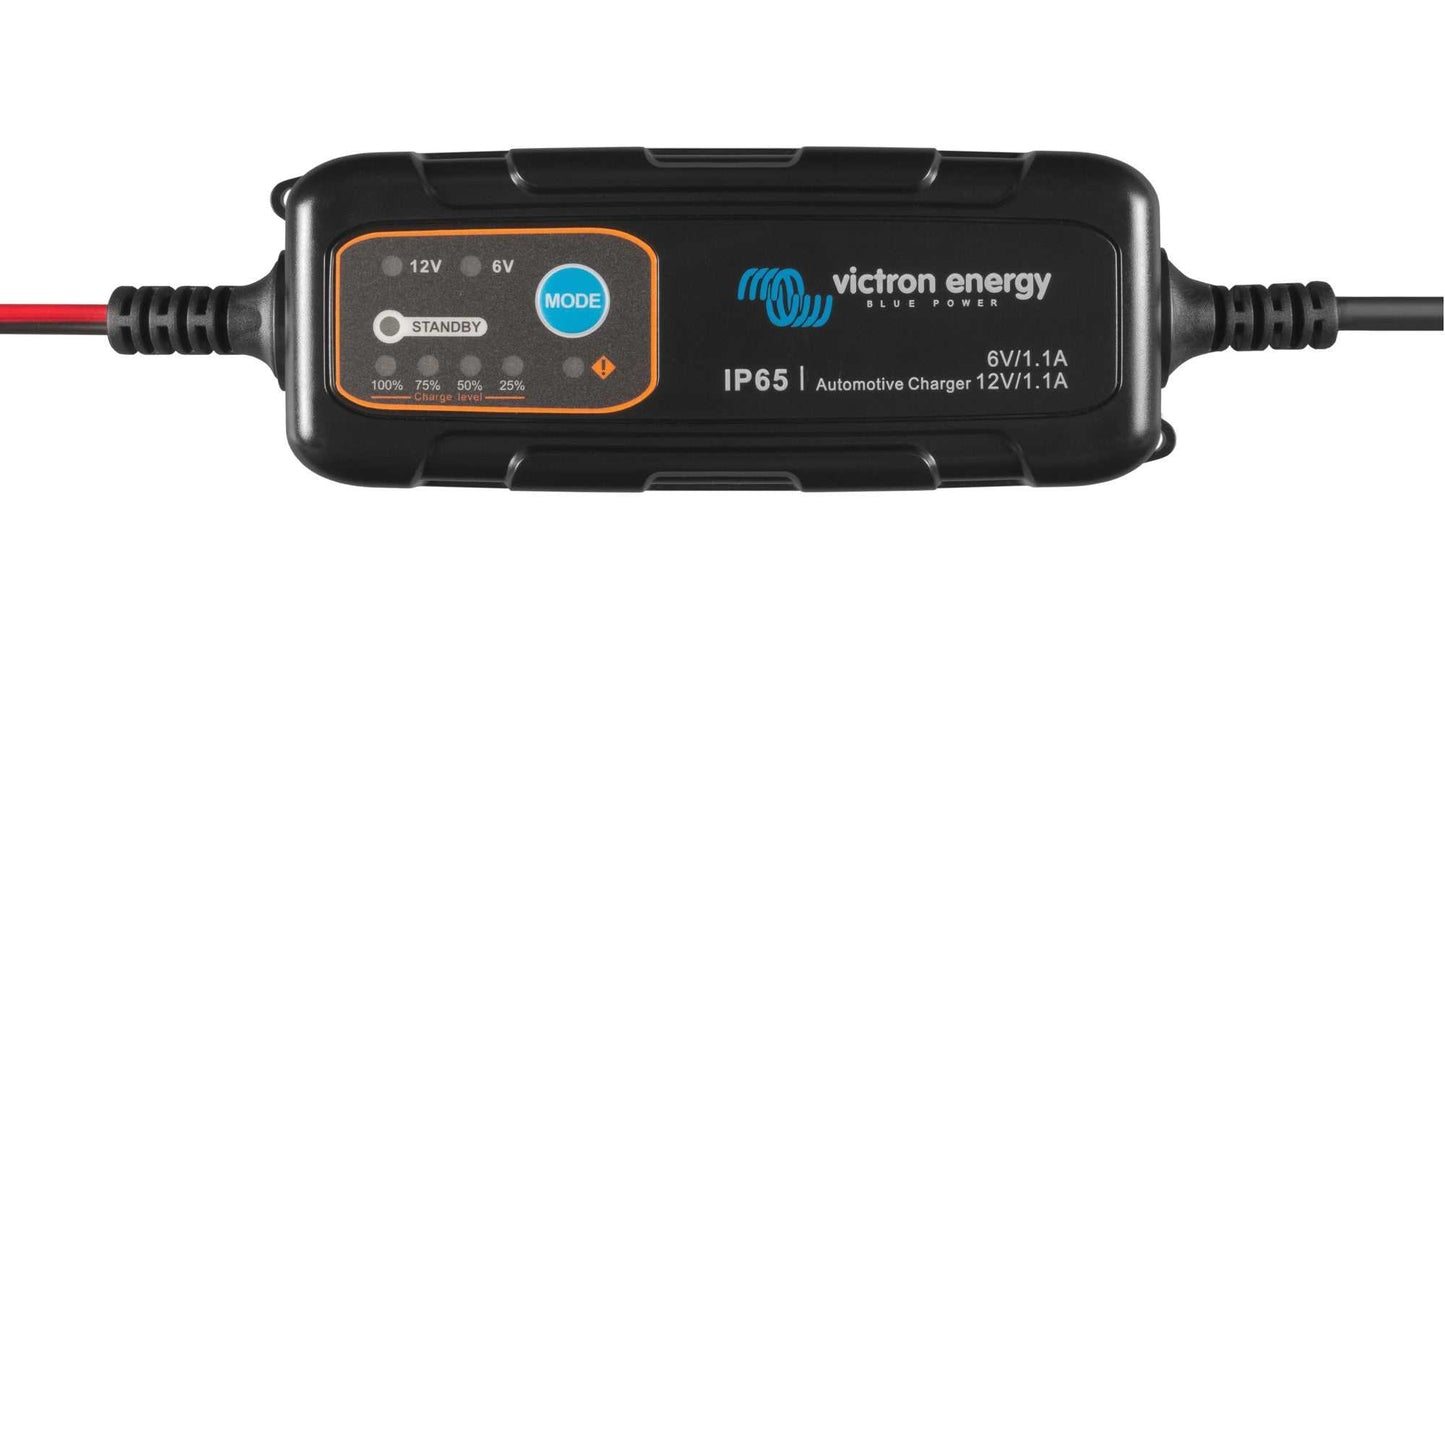 Automotive IP65 Charger